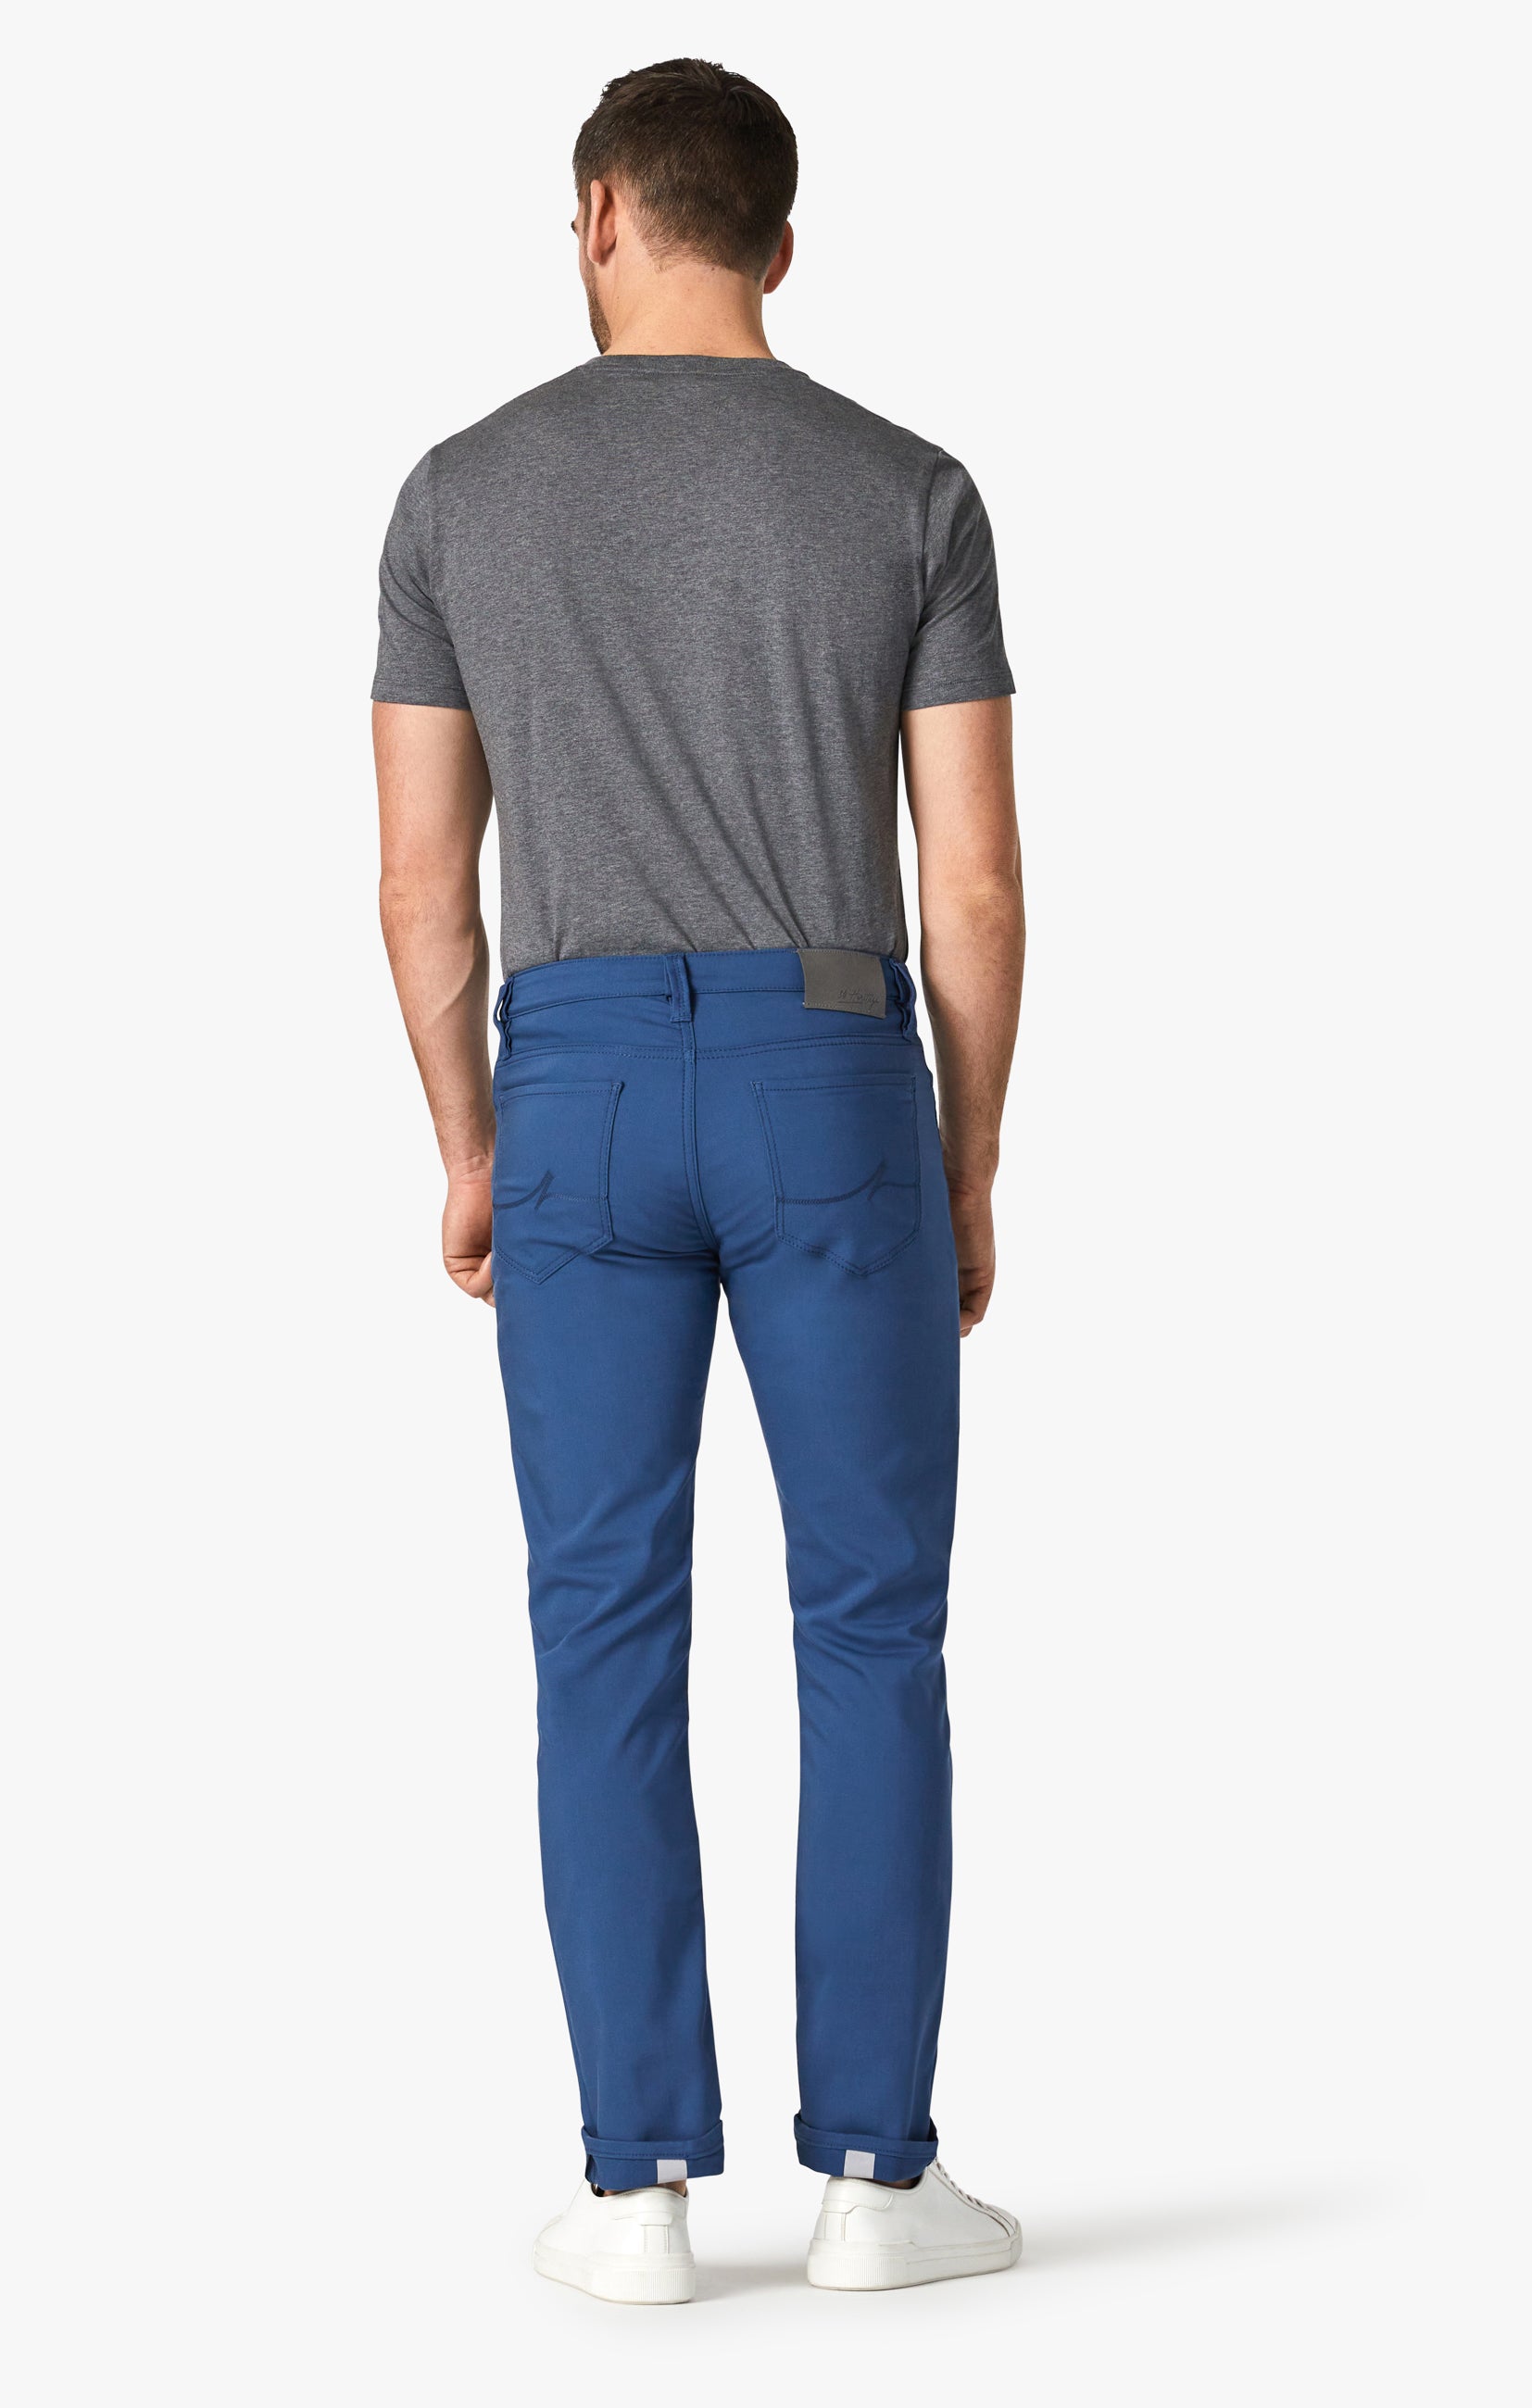 Courage Straight Leg Jeans in Cobalt Commuter Image 2